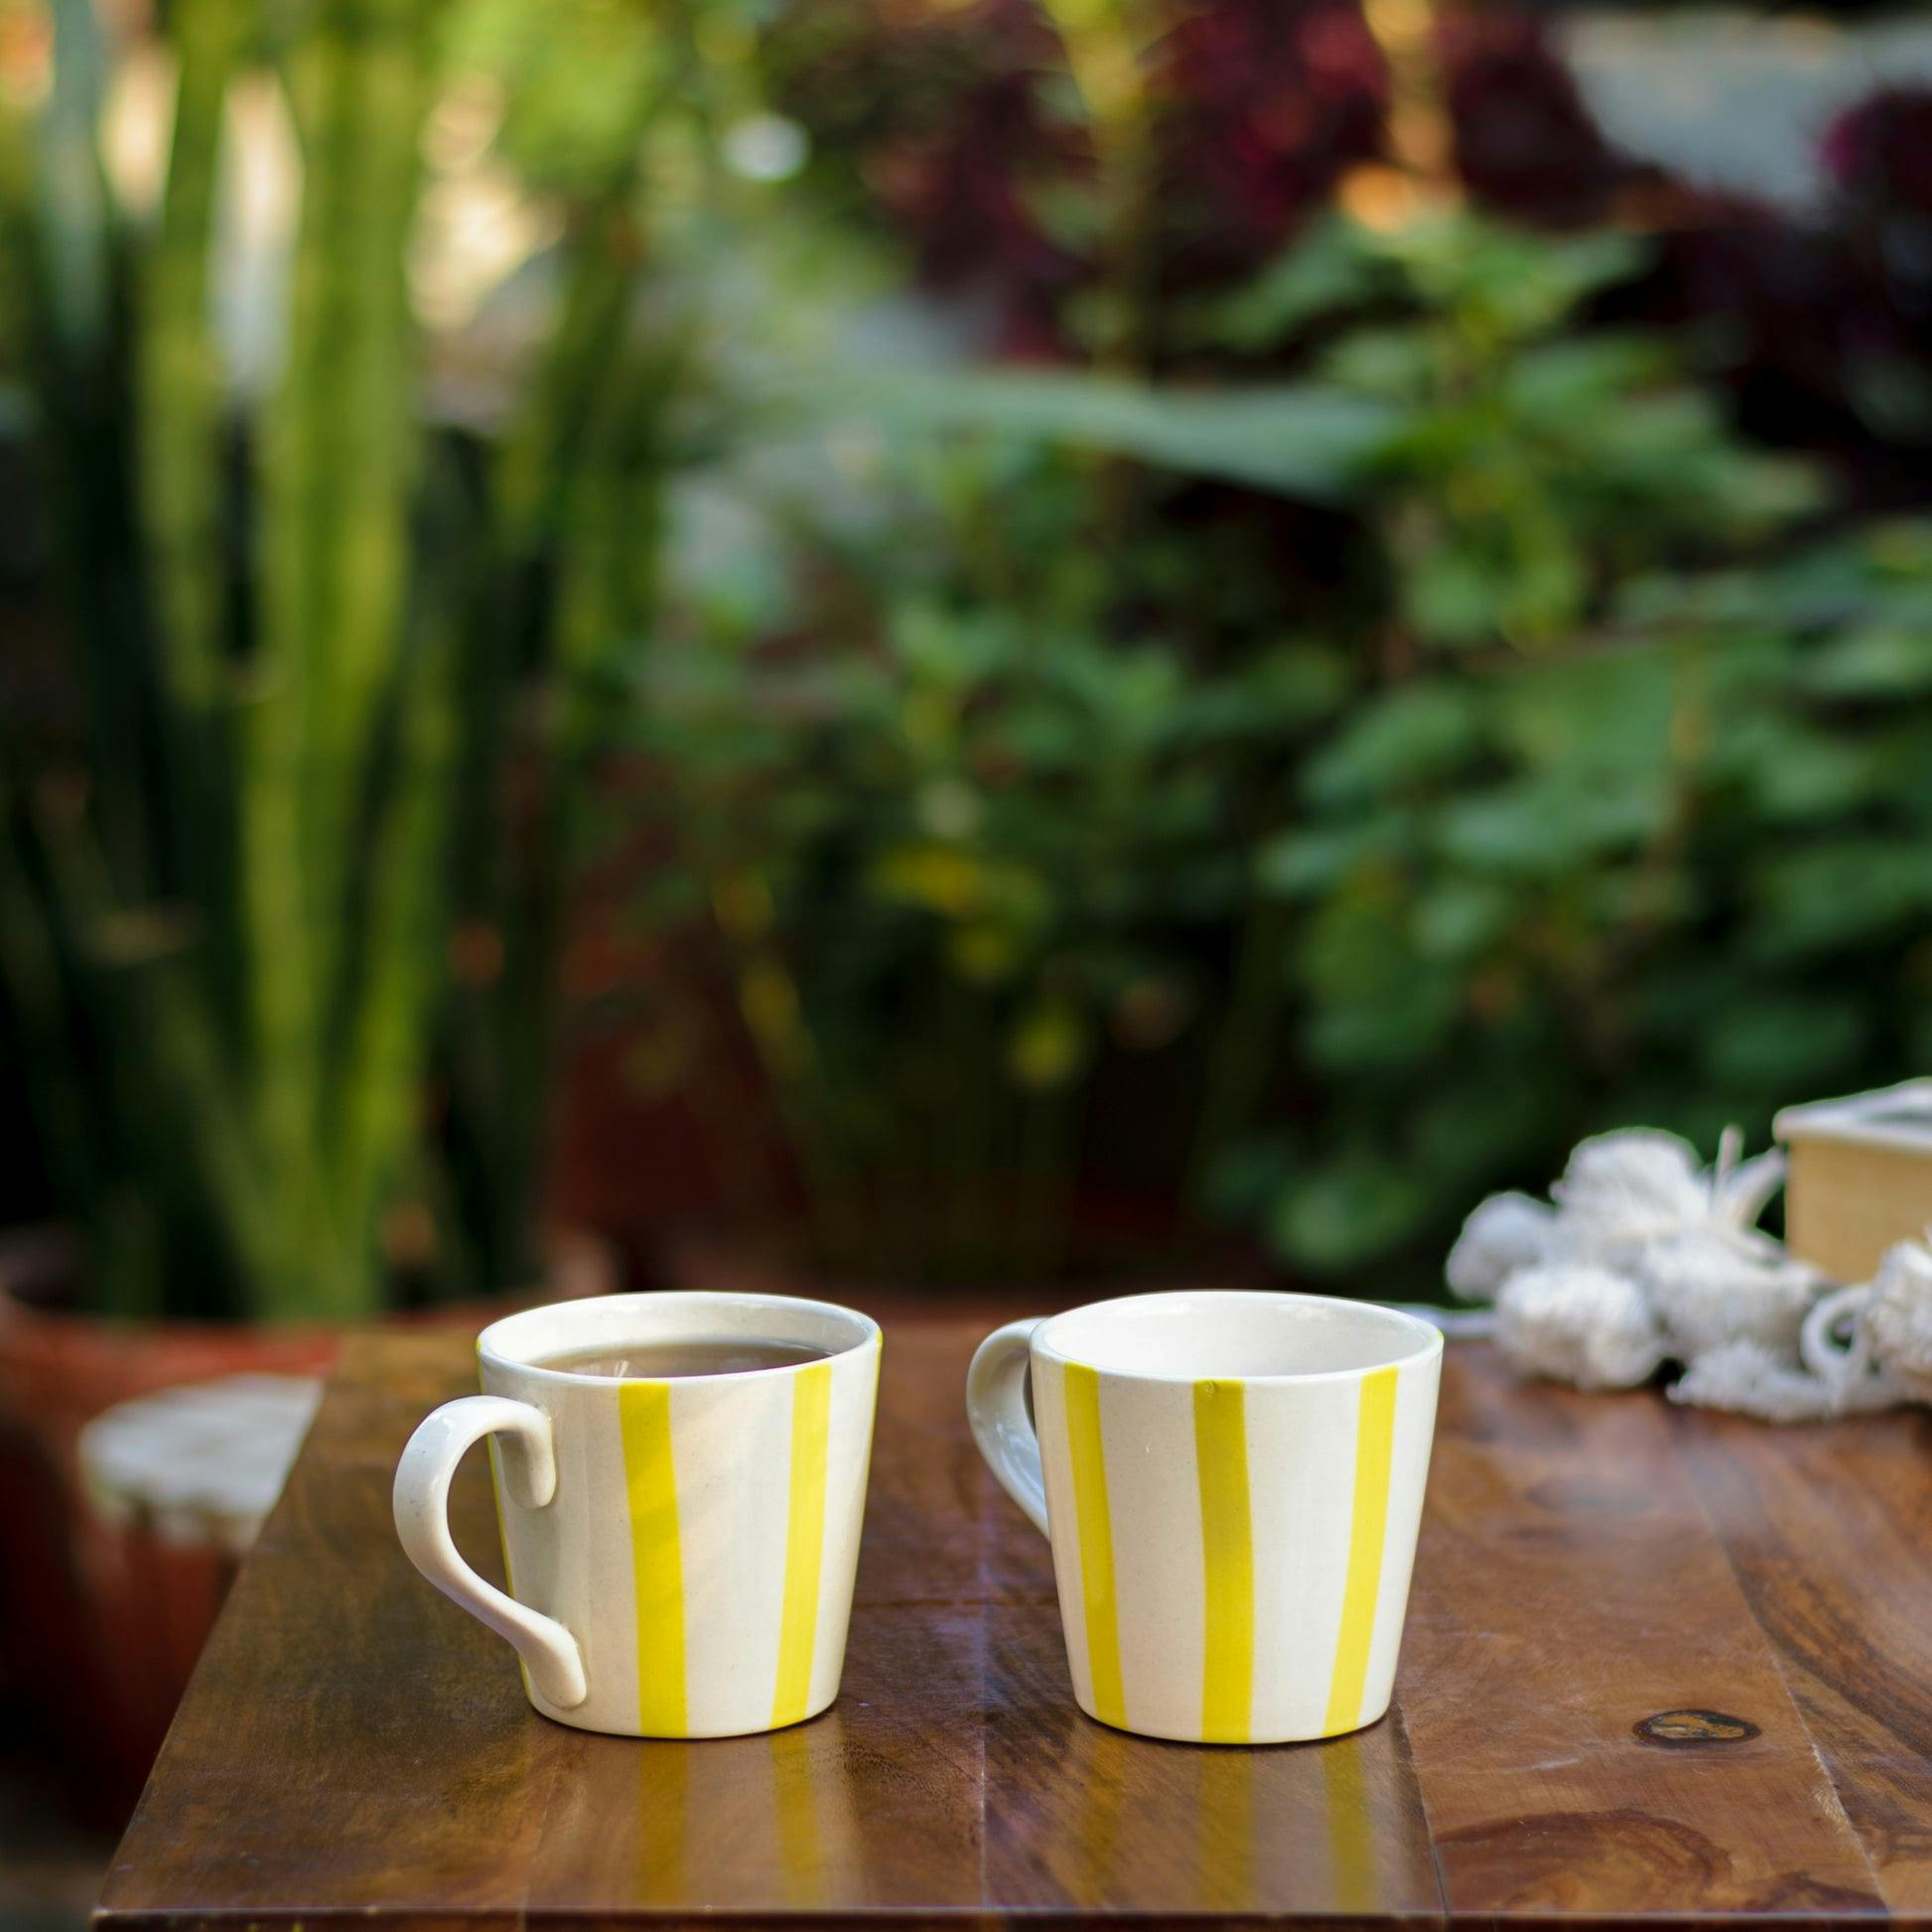 Stripe Mugs Yellow - Set of 2, a product by Oh Yay project